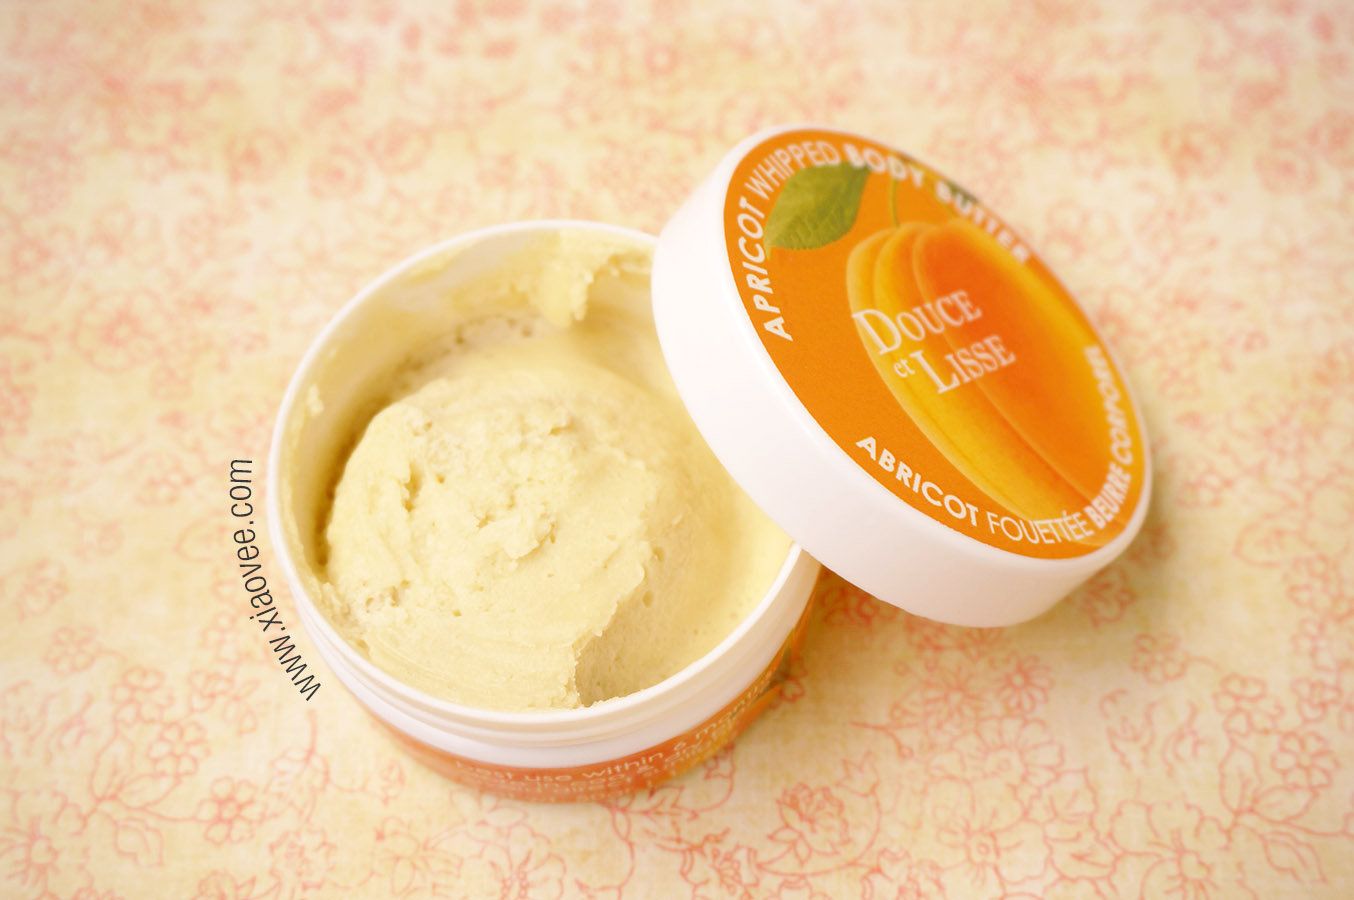 Douce et Lisse, whipped body butter in apricot